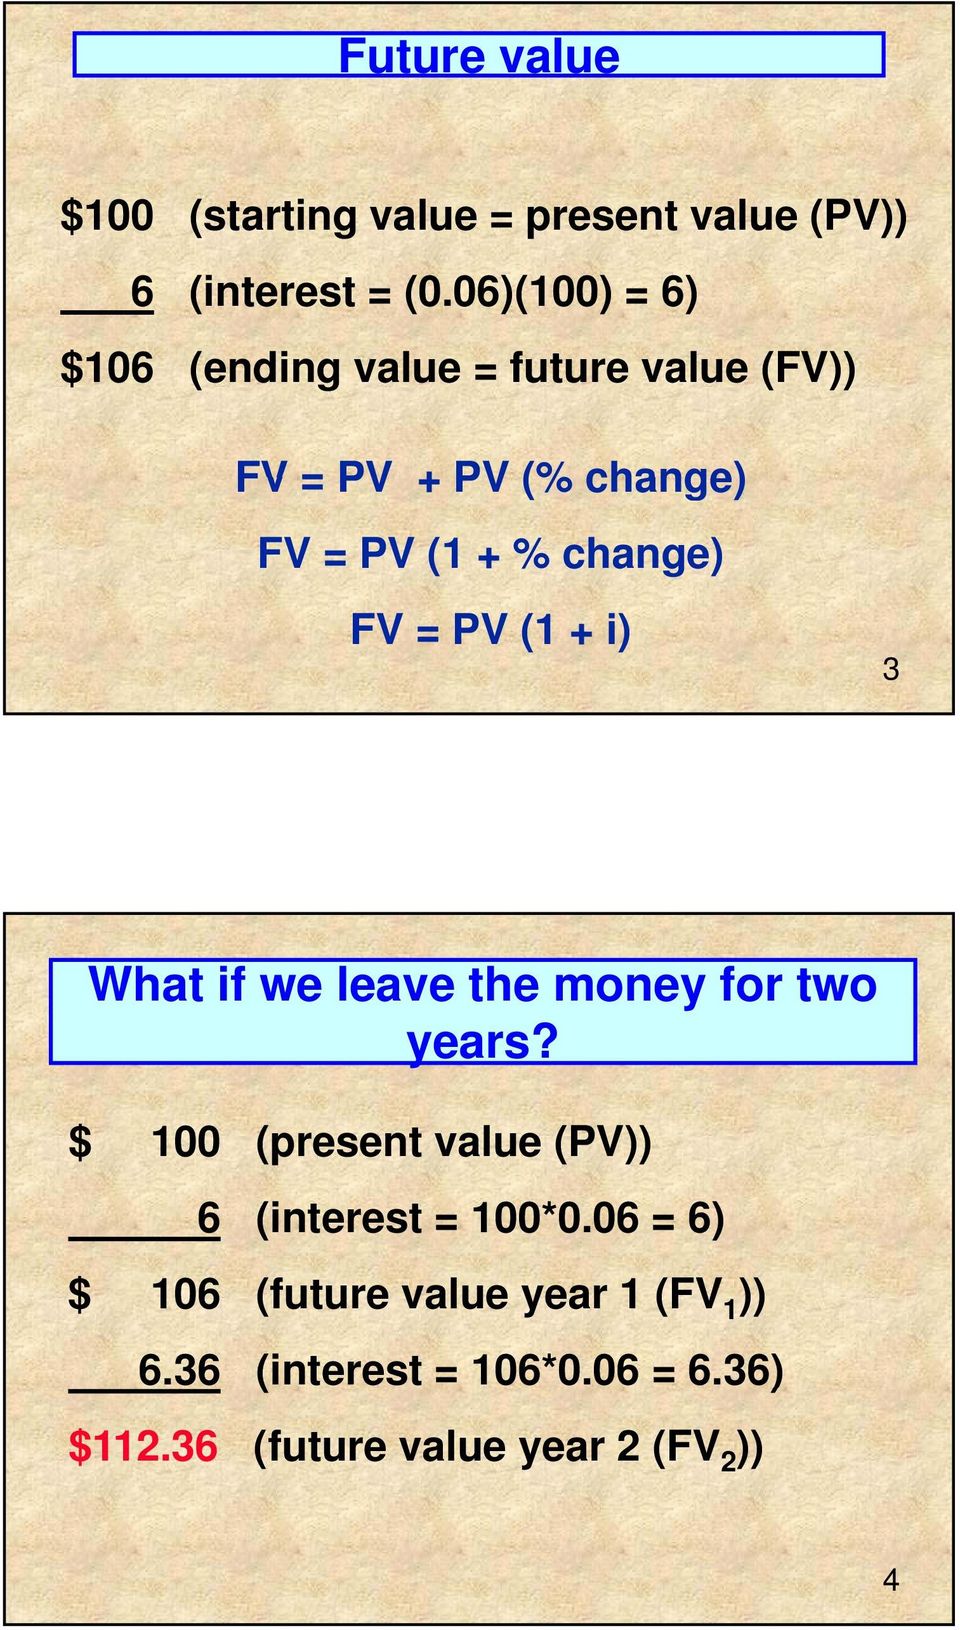 change) FV = PV (1 + i) 3 What if we leave the money for two years?